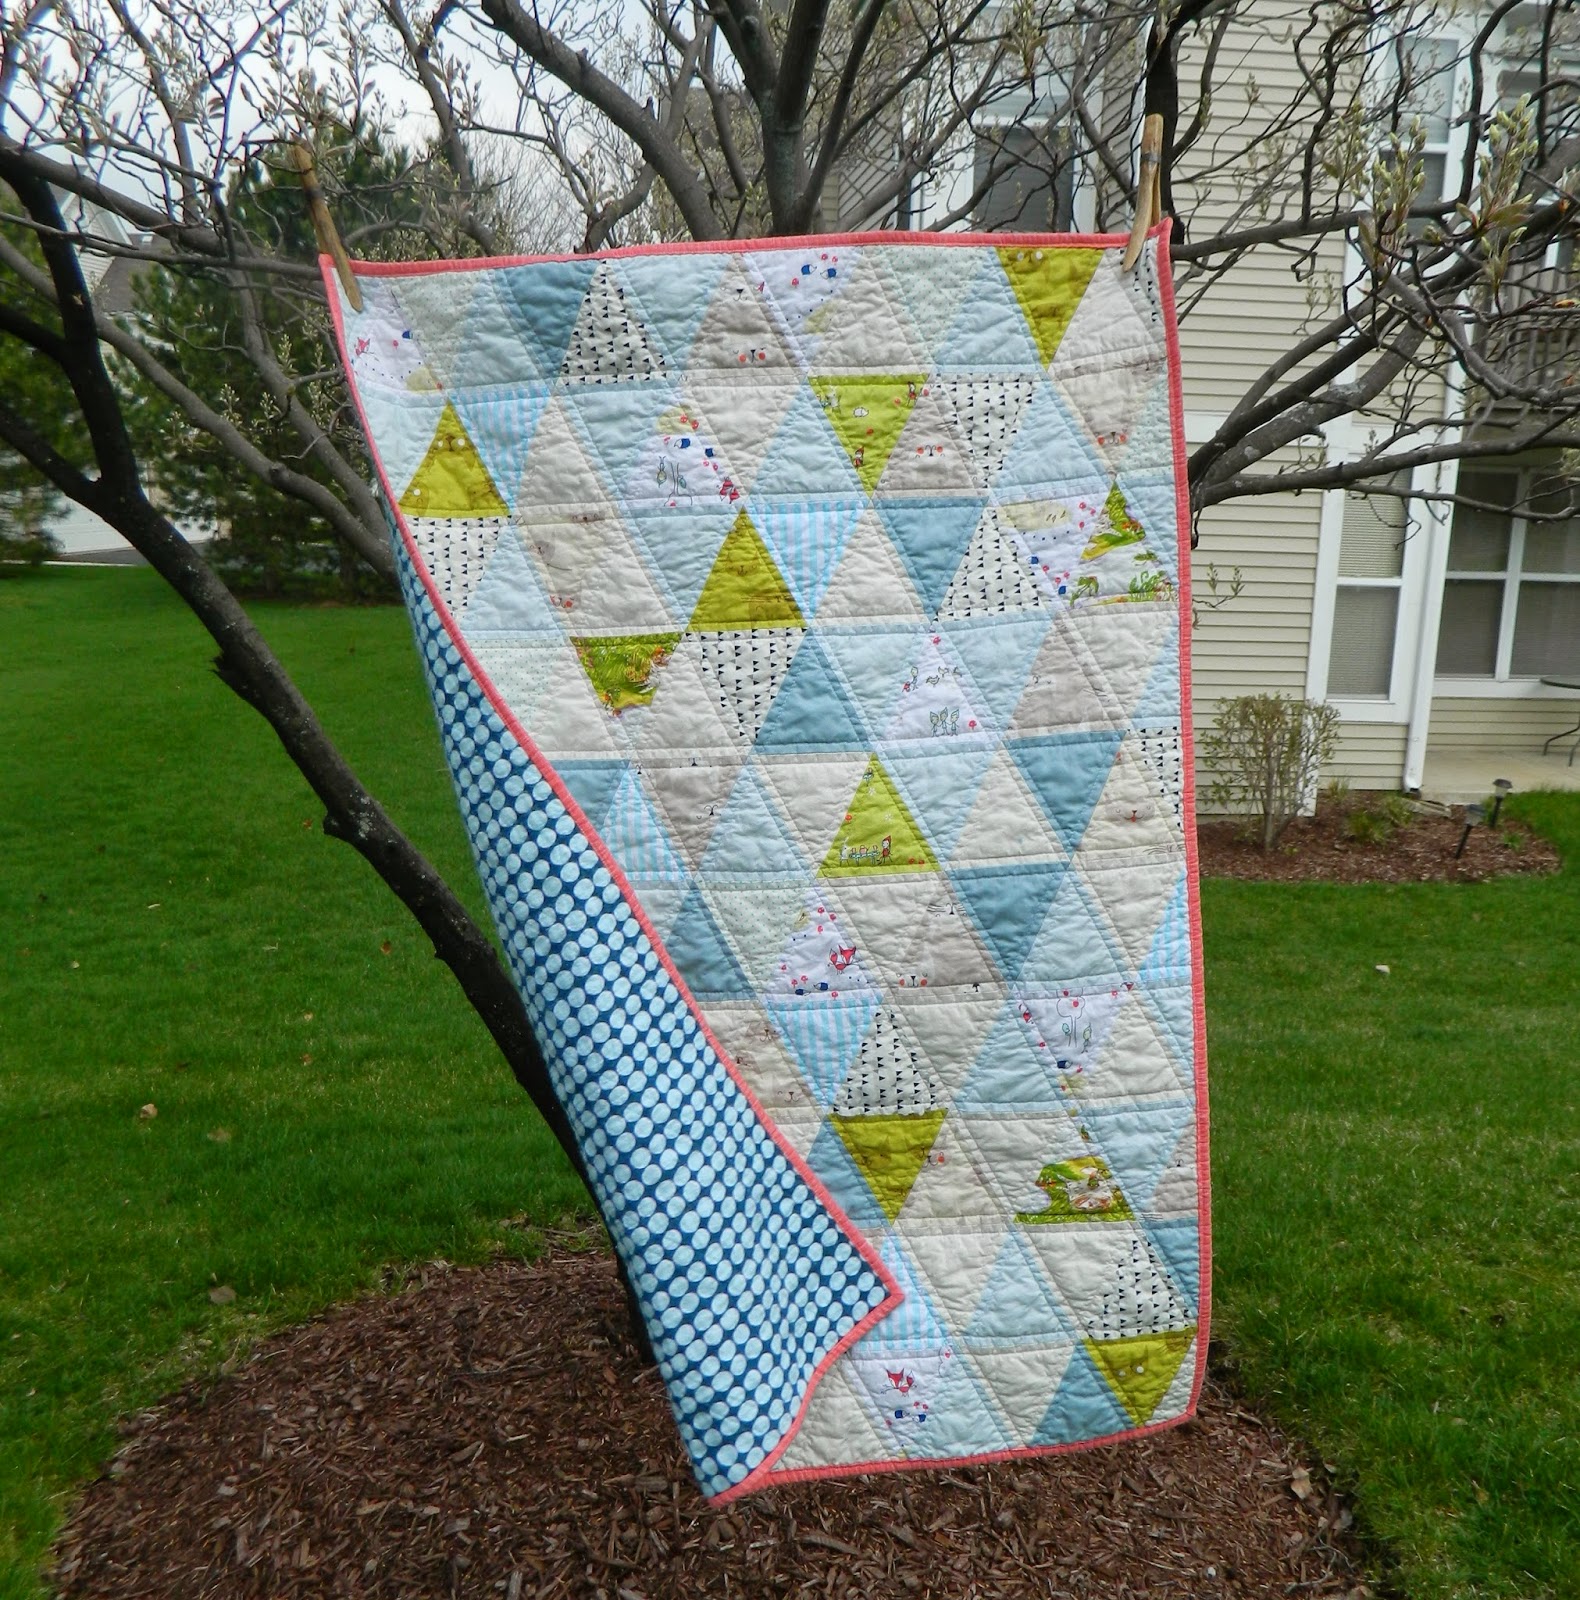 http://sotakhandmade.blogspot.com/2014/04/triangles-finished-baby-quilt.html